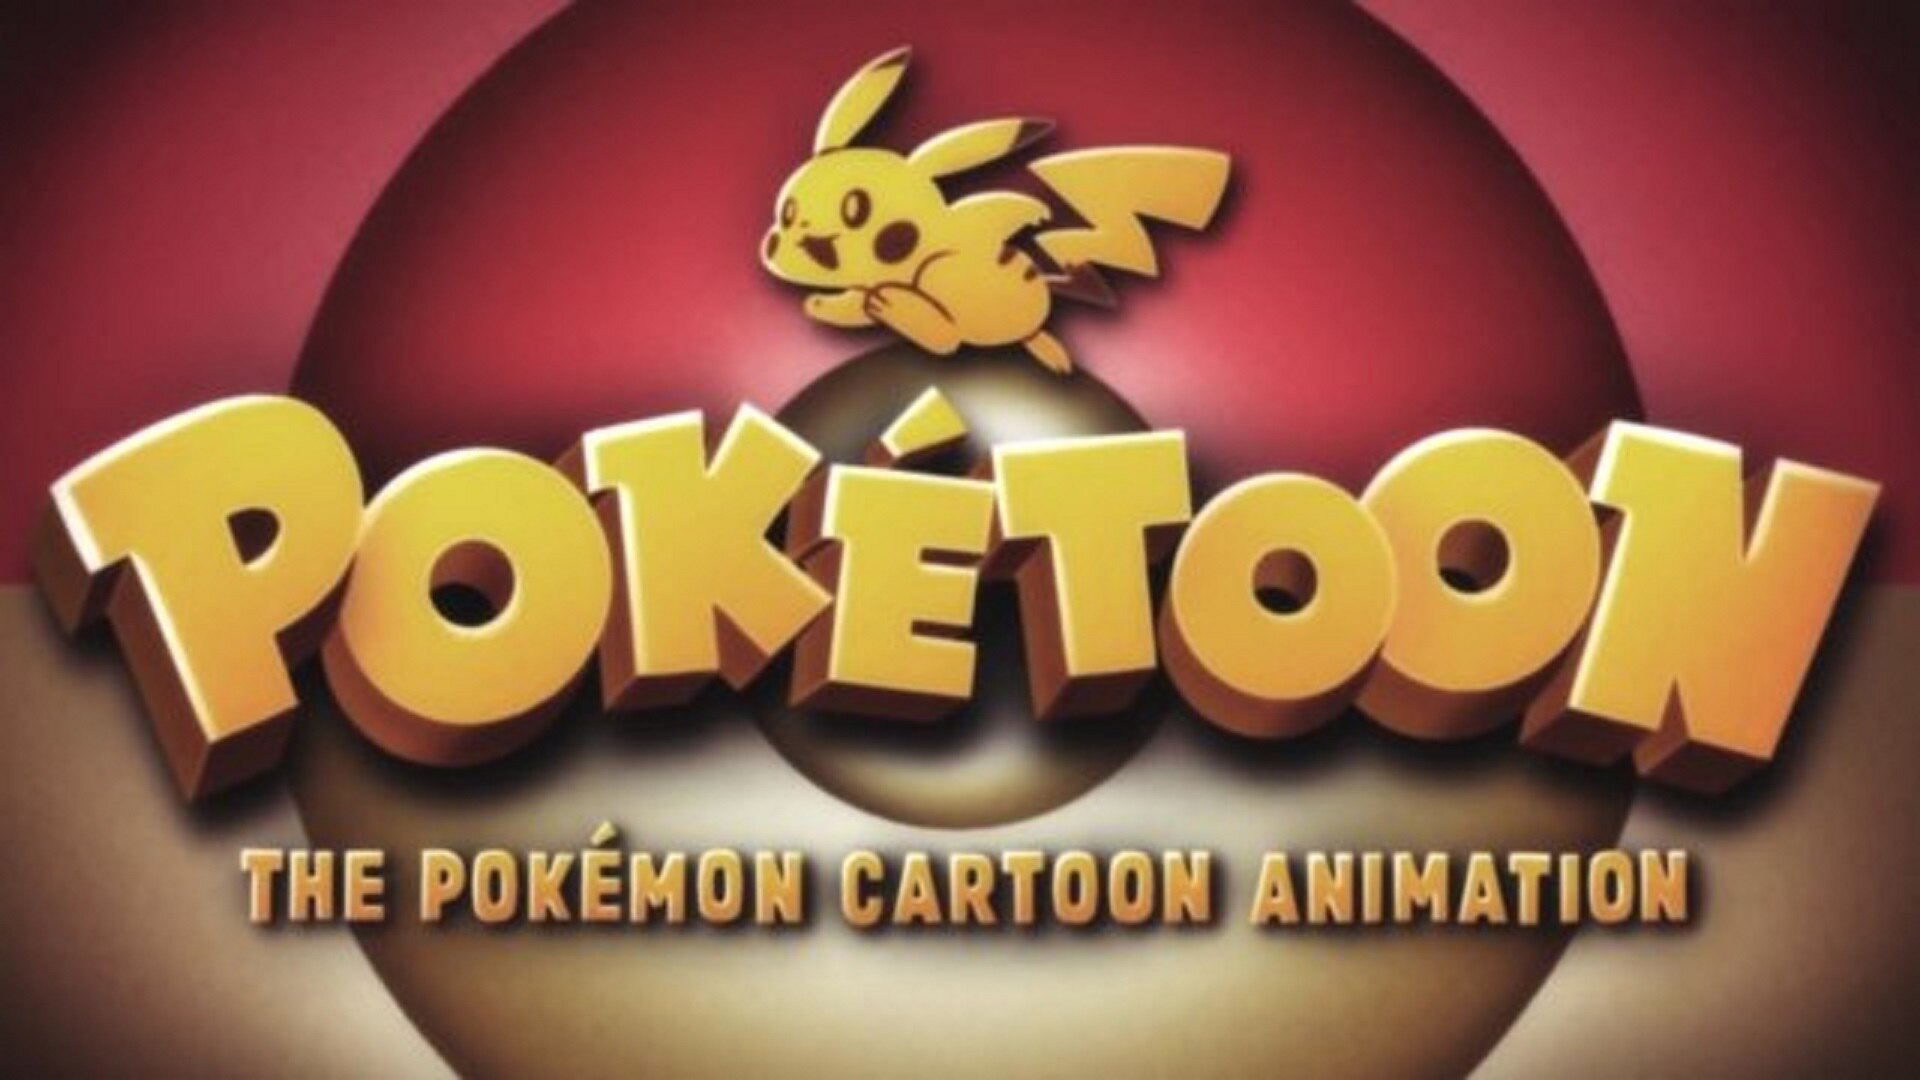 PokeToon countdown how many days until the next episode